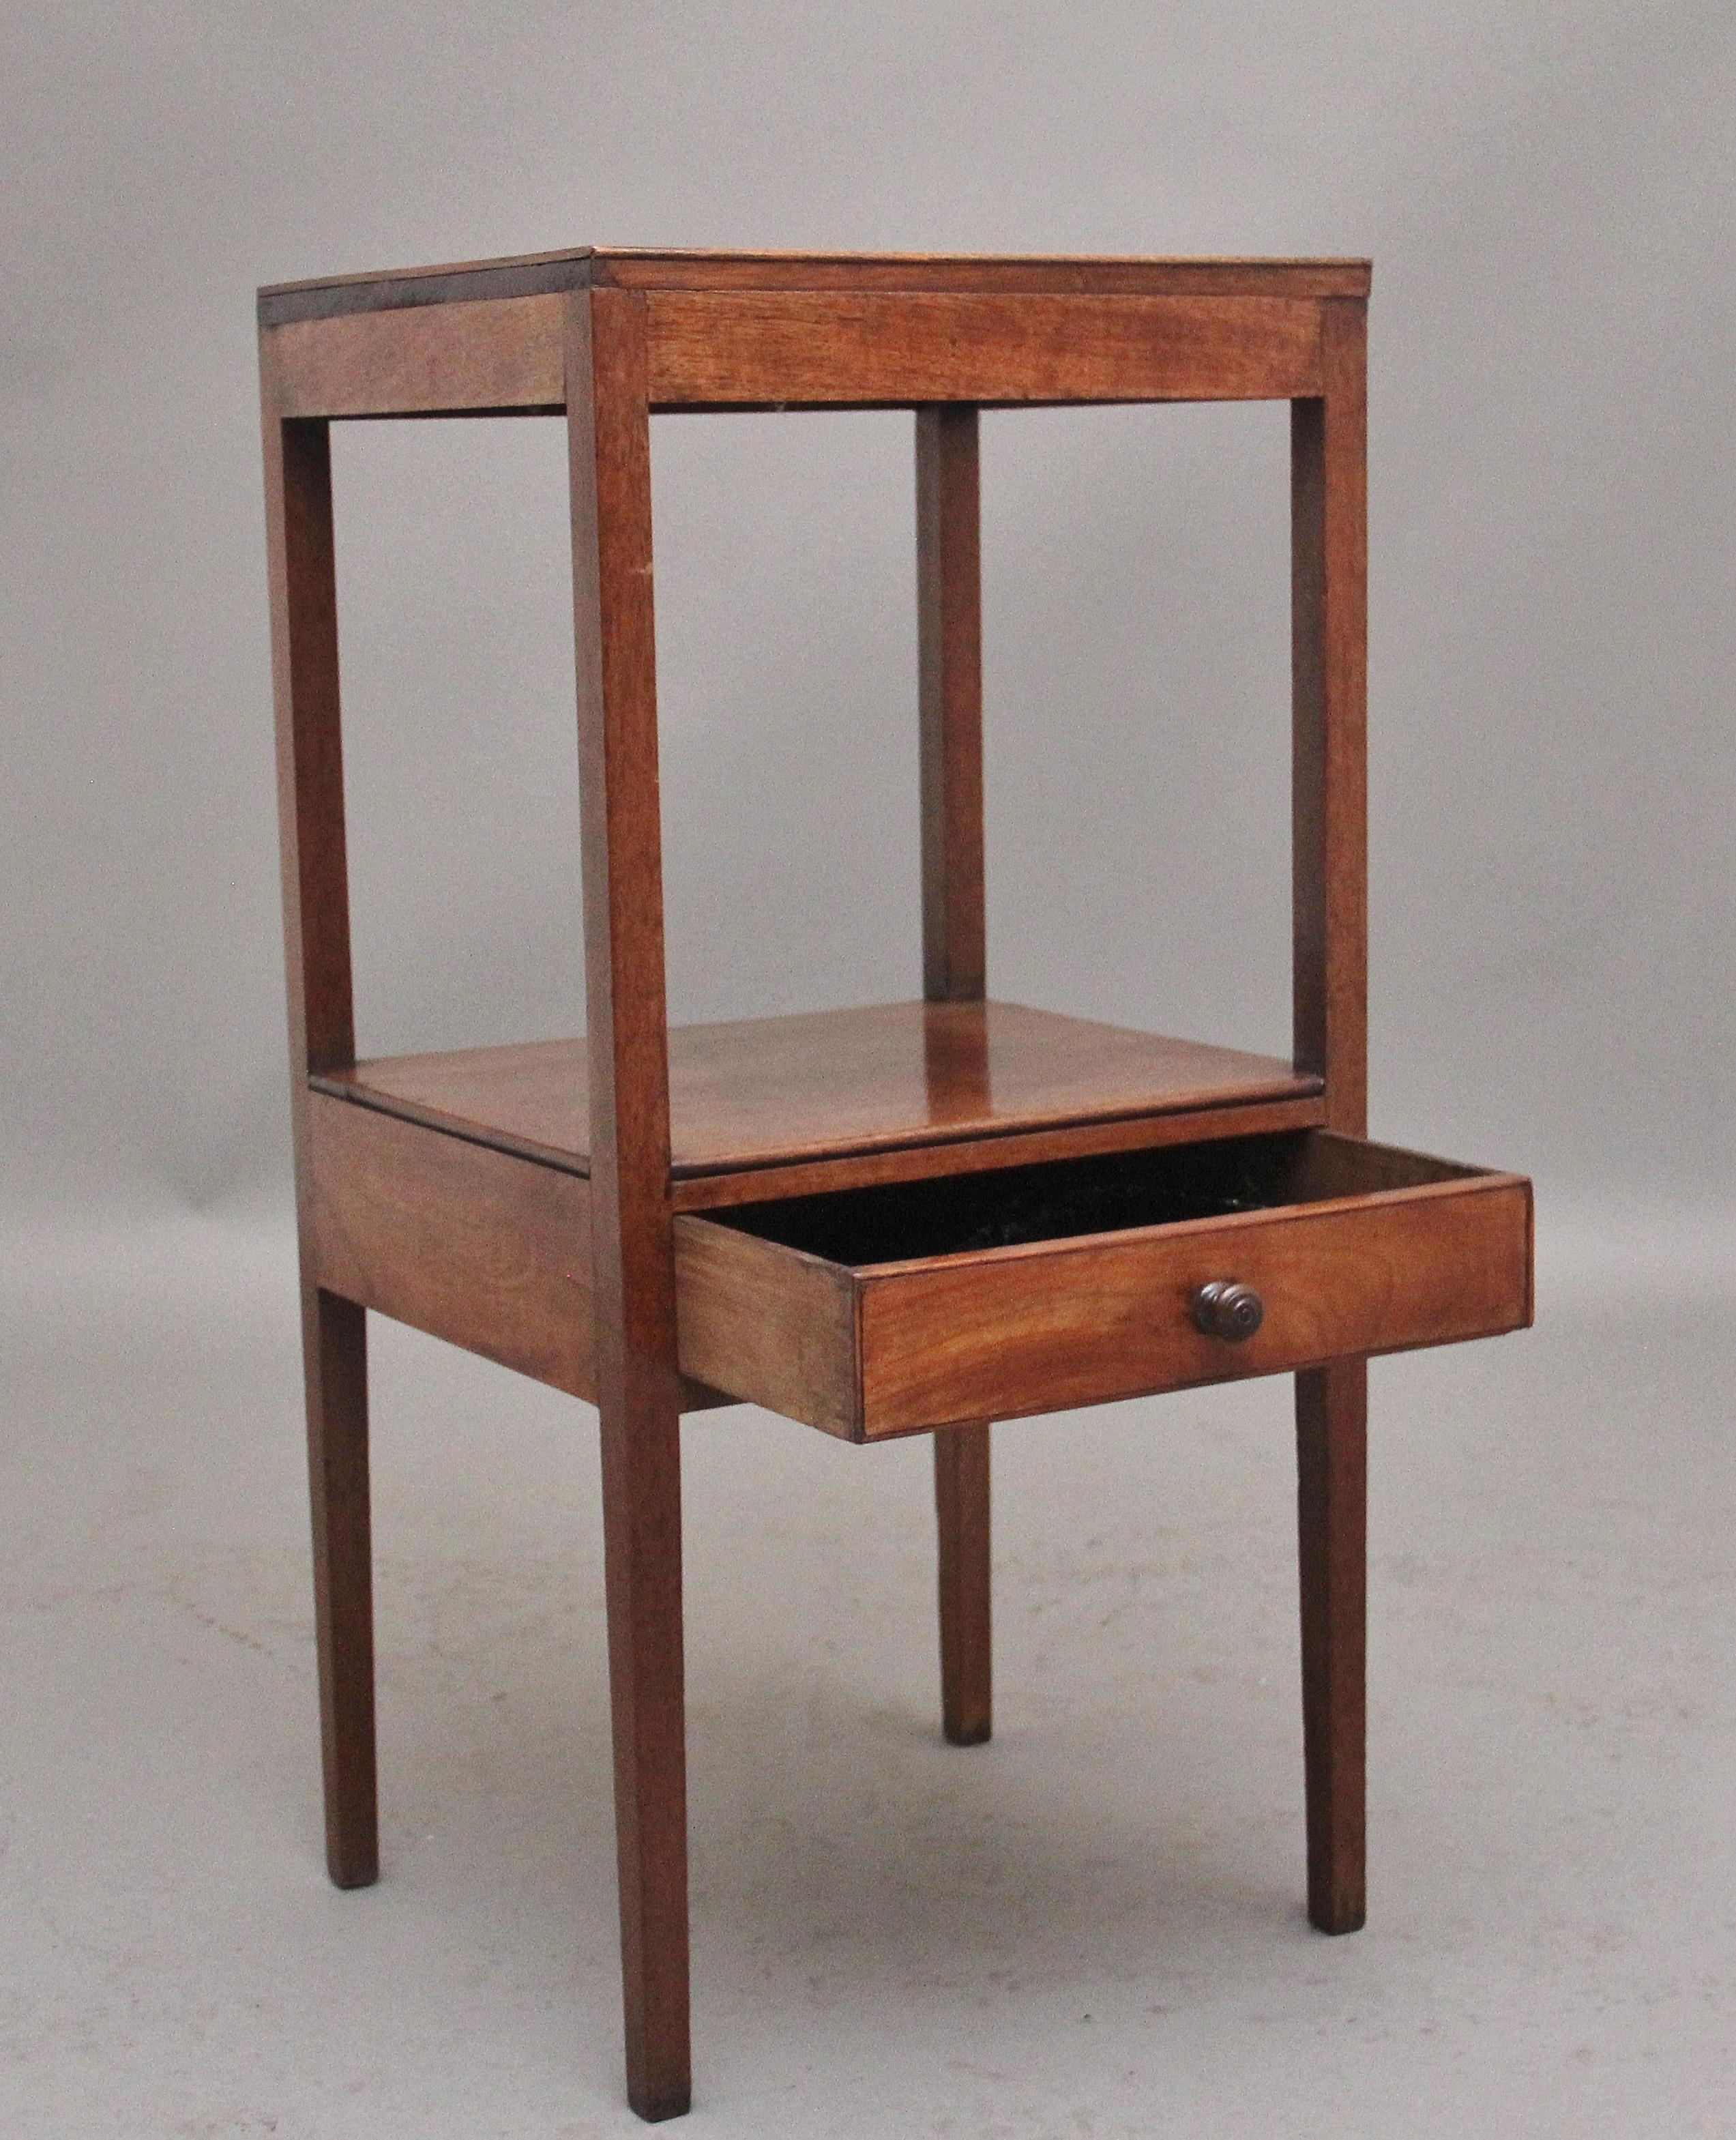 19th Century mahogany bedside table, having a nice figured top and a shelf below with an oak lined frieze drawer with the original turned wooden knob handle, supported on square legs.  Circa 1830.